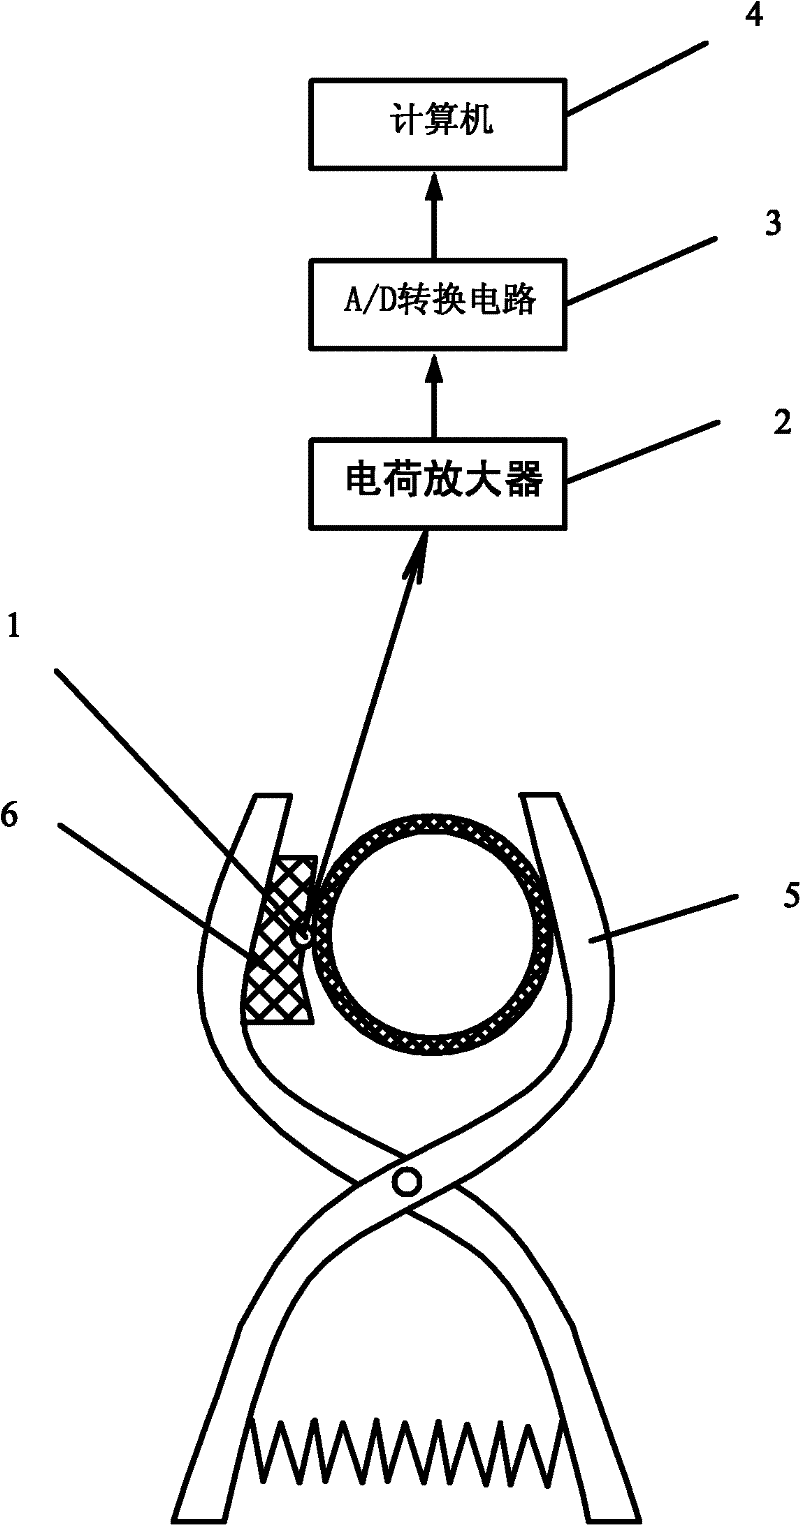 Method for inspecting water circulation system in water-cooling winding of turbonator